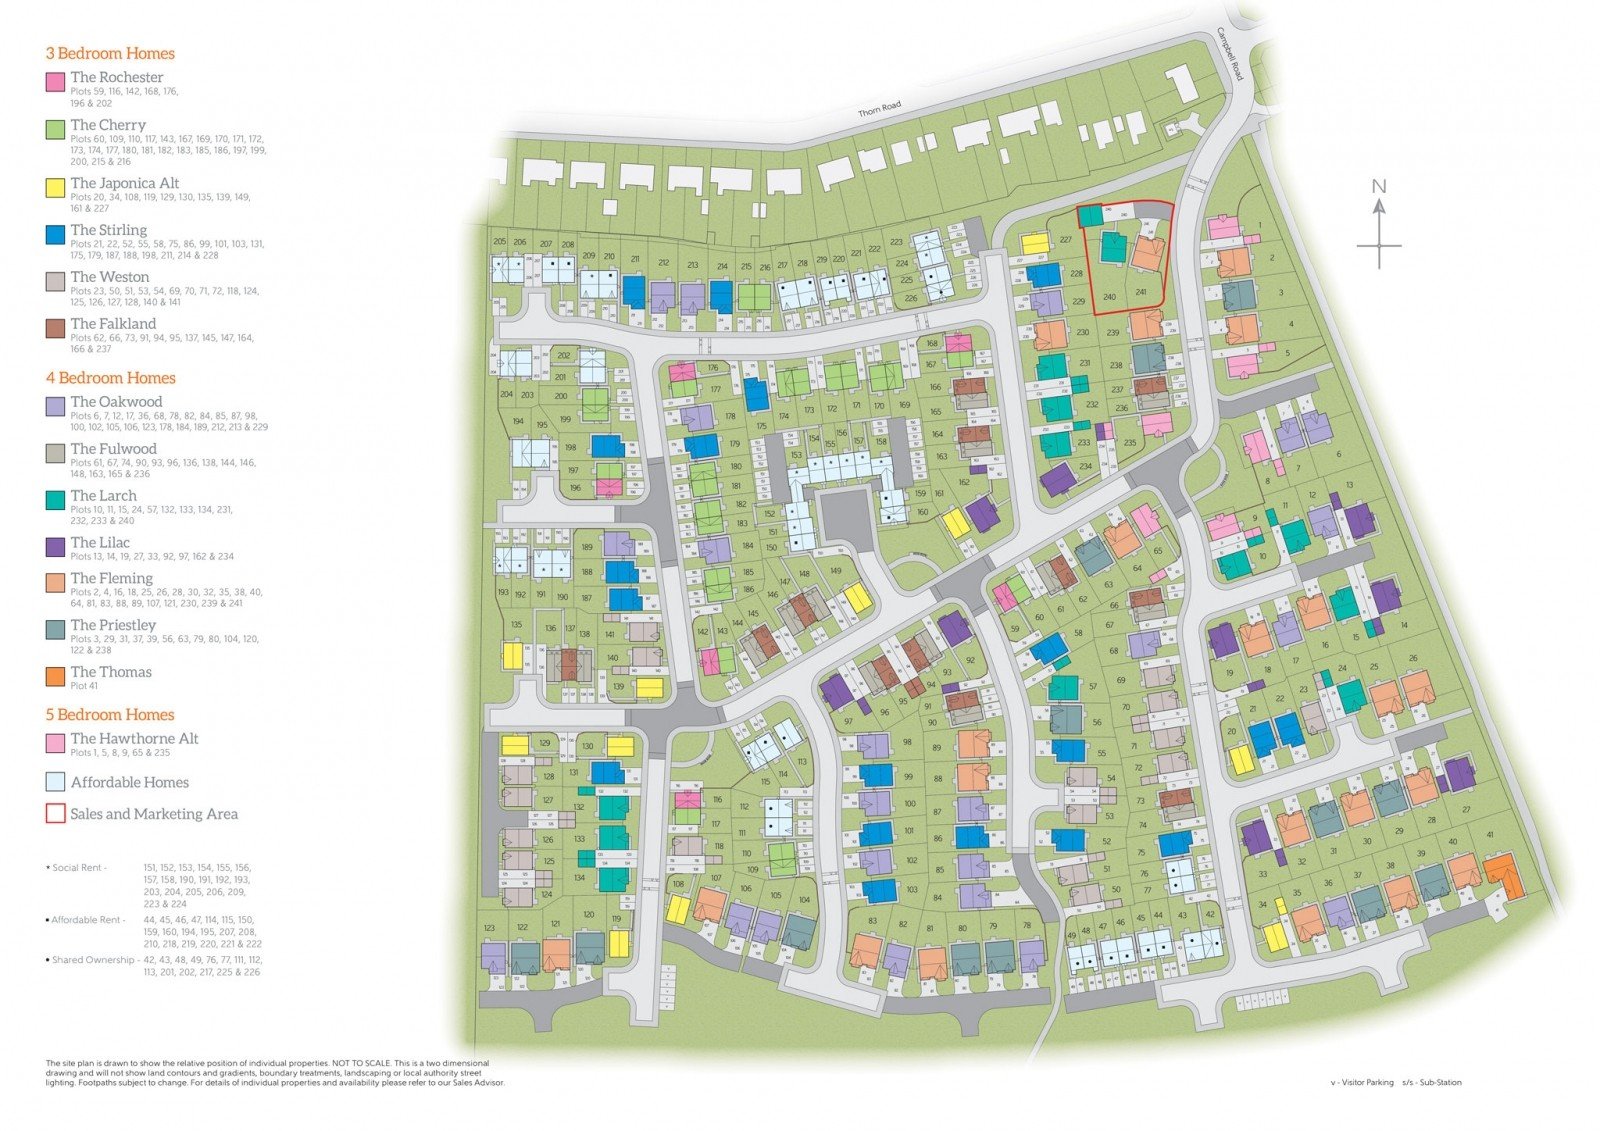 site plan The Weston - The Brackens, Greater Manchester